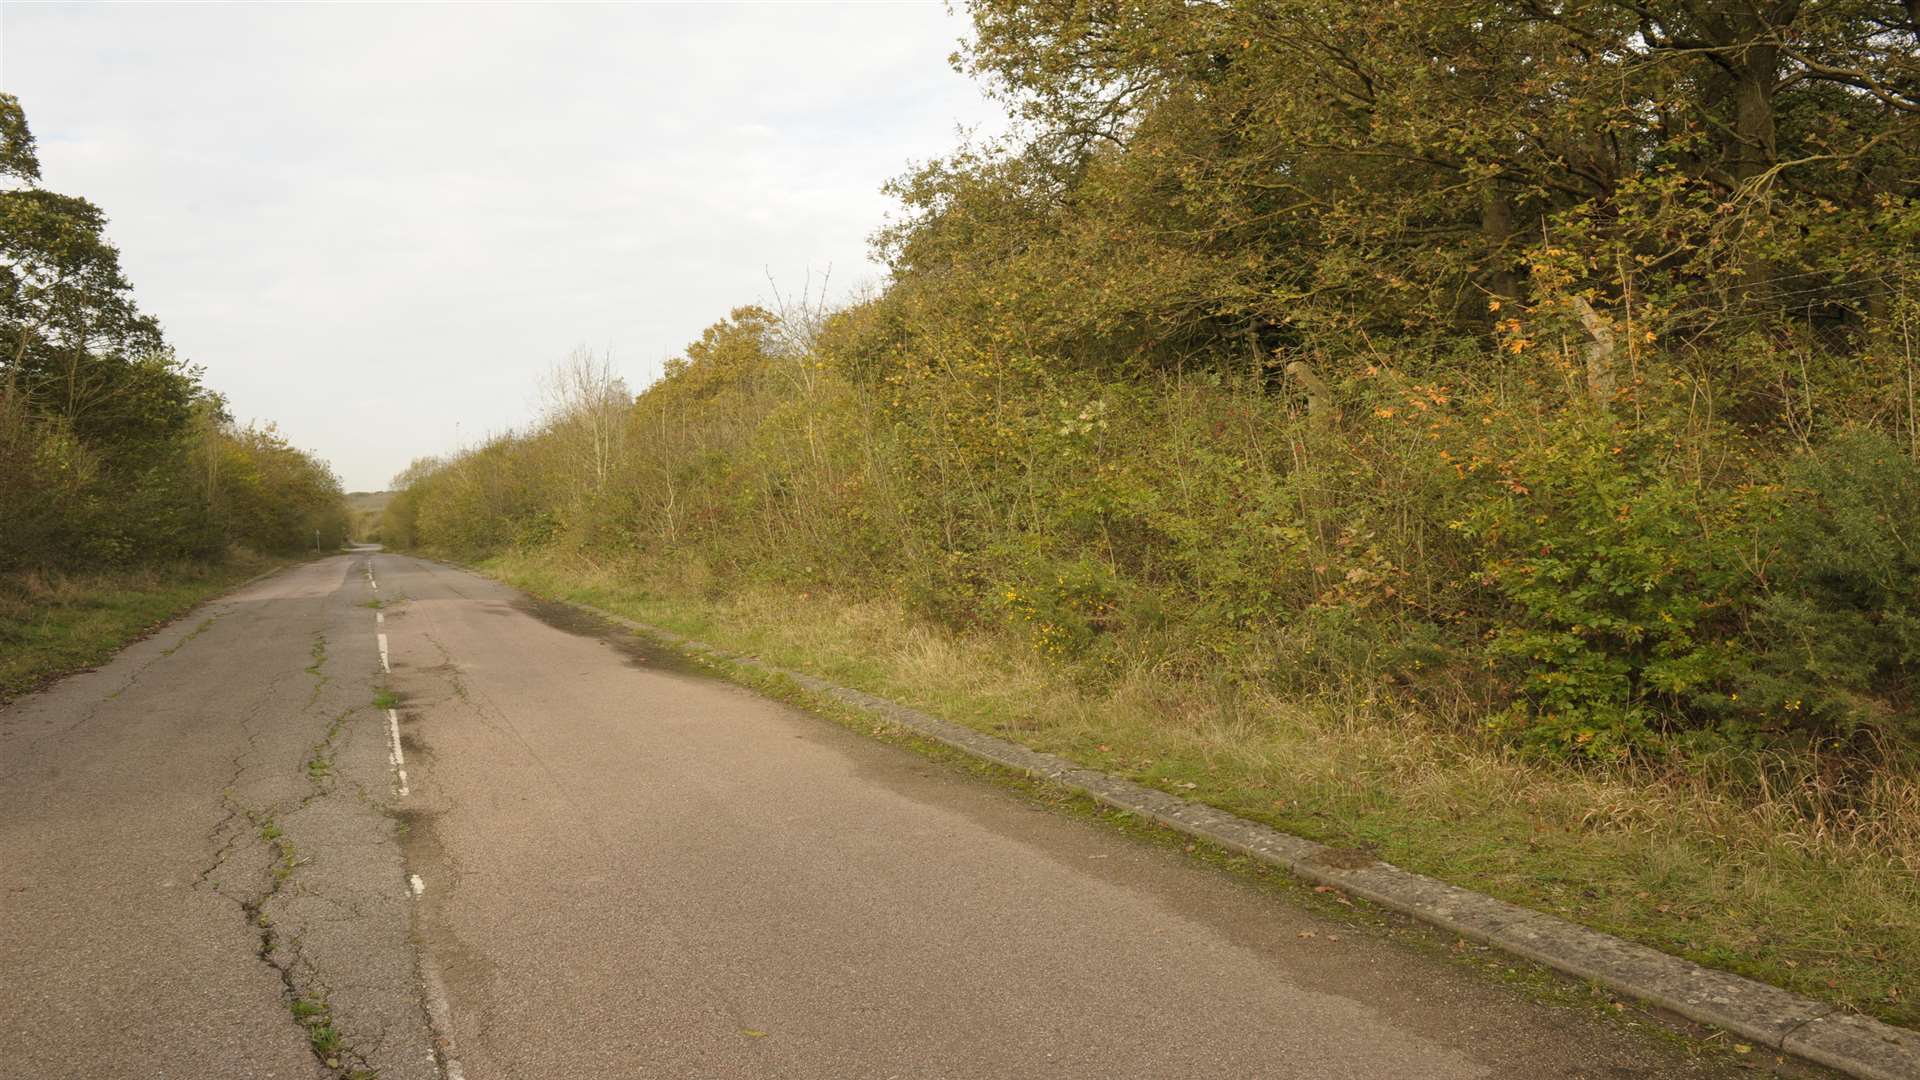 Lochat Road which runs around the former army camp in Chattenden